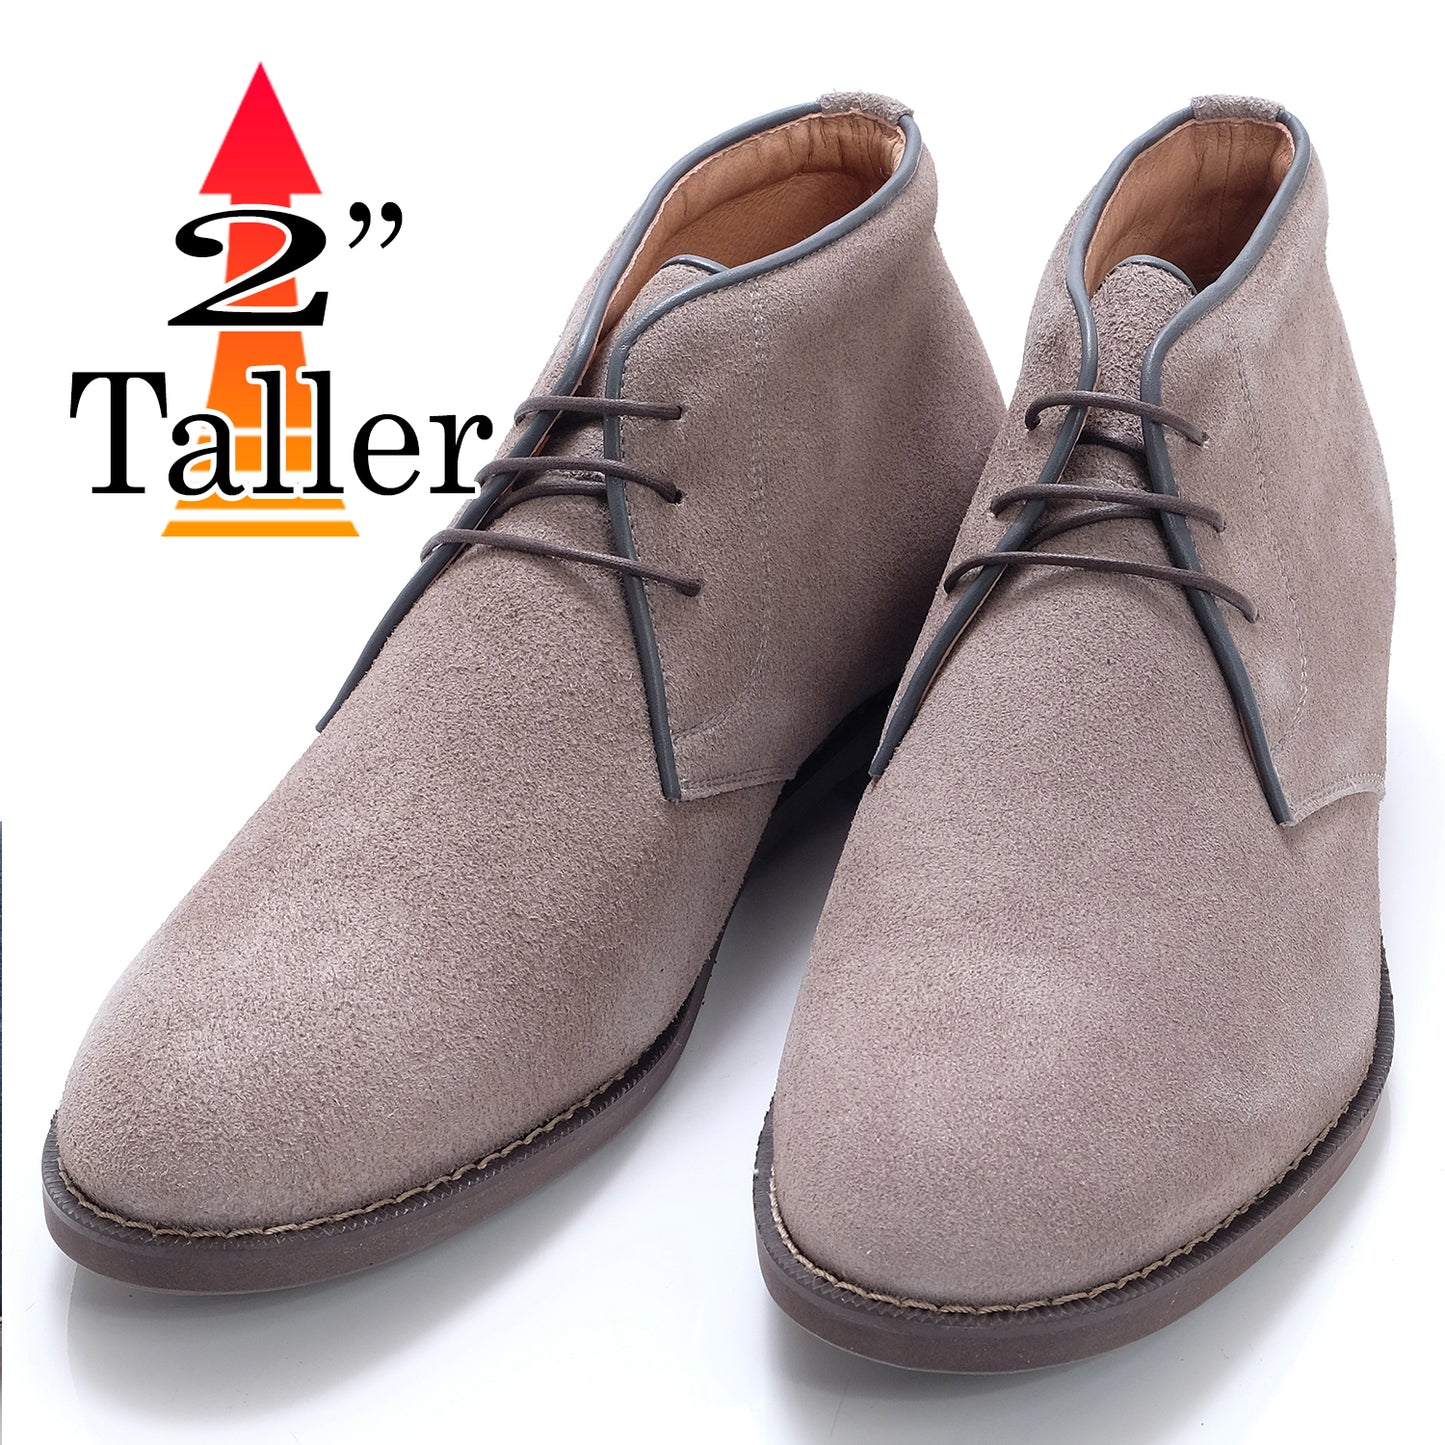 Men's Elevator Shoes Height Increasing 2" Taller Chukka Boots Velour Leather Ankle Boots No. 850